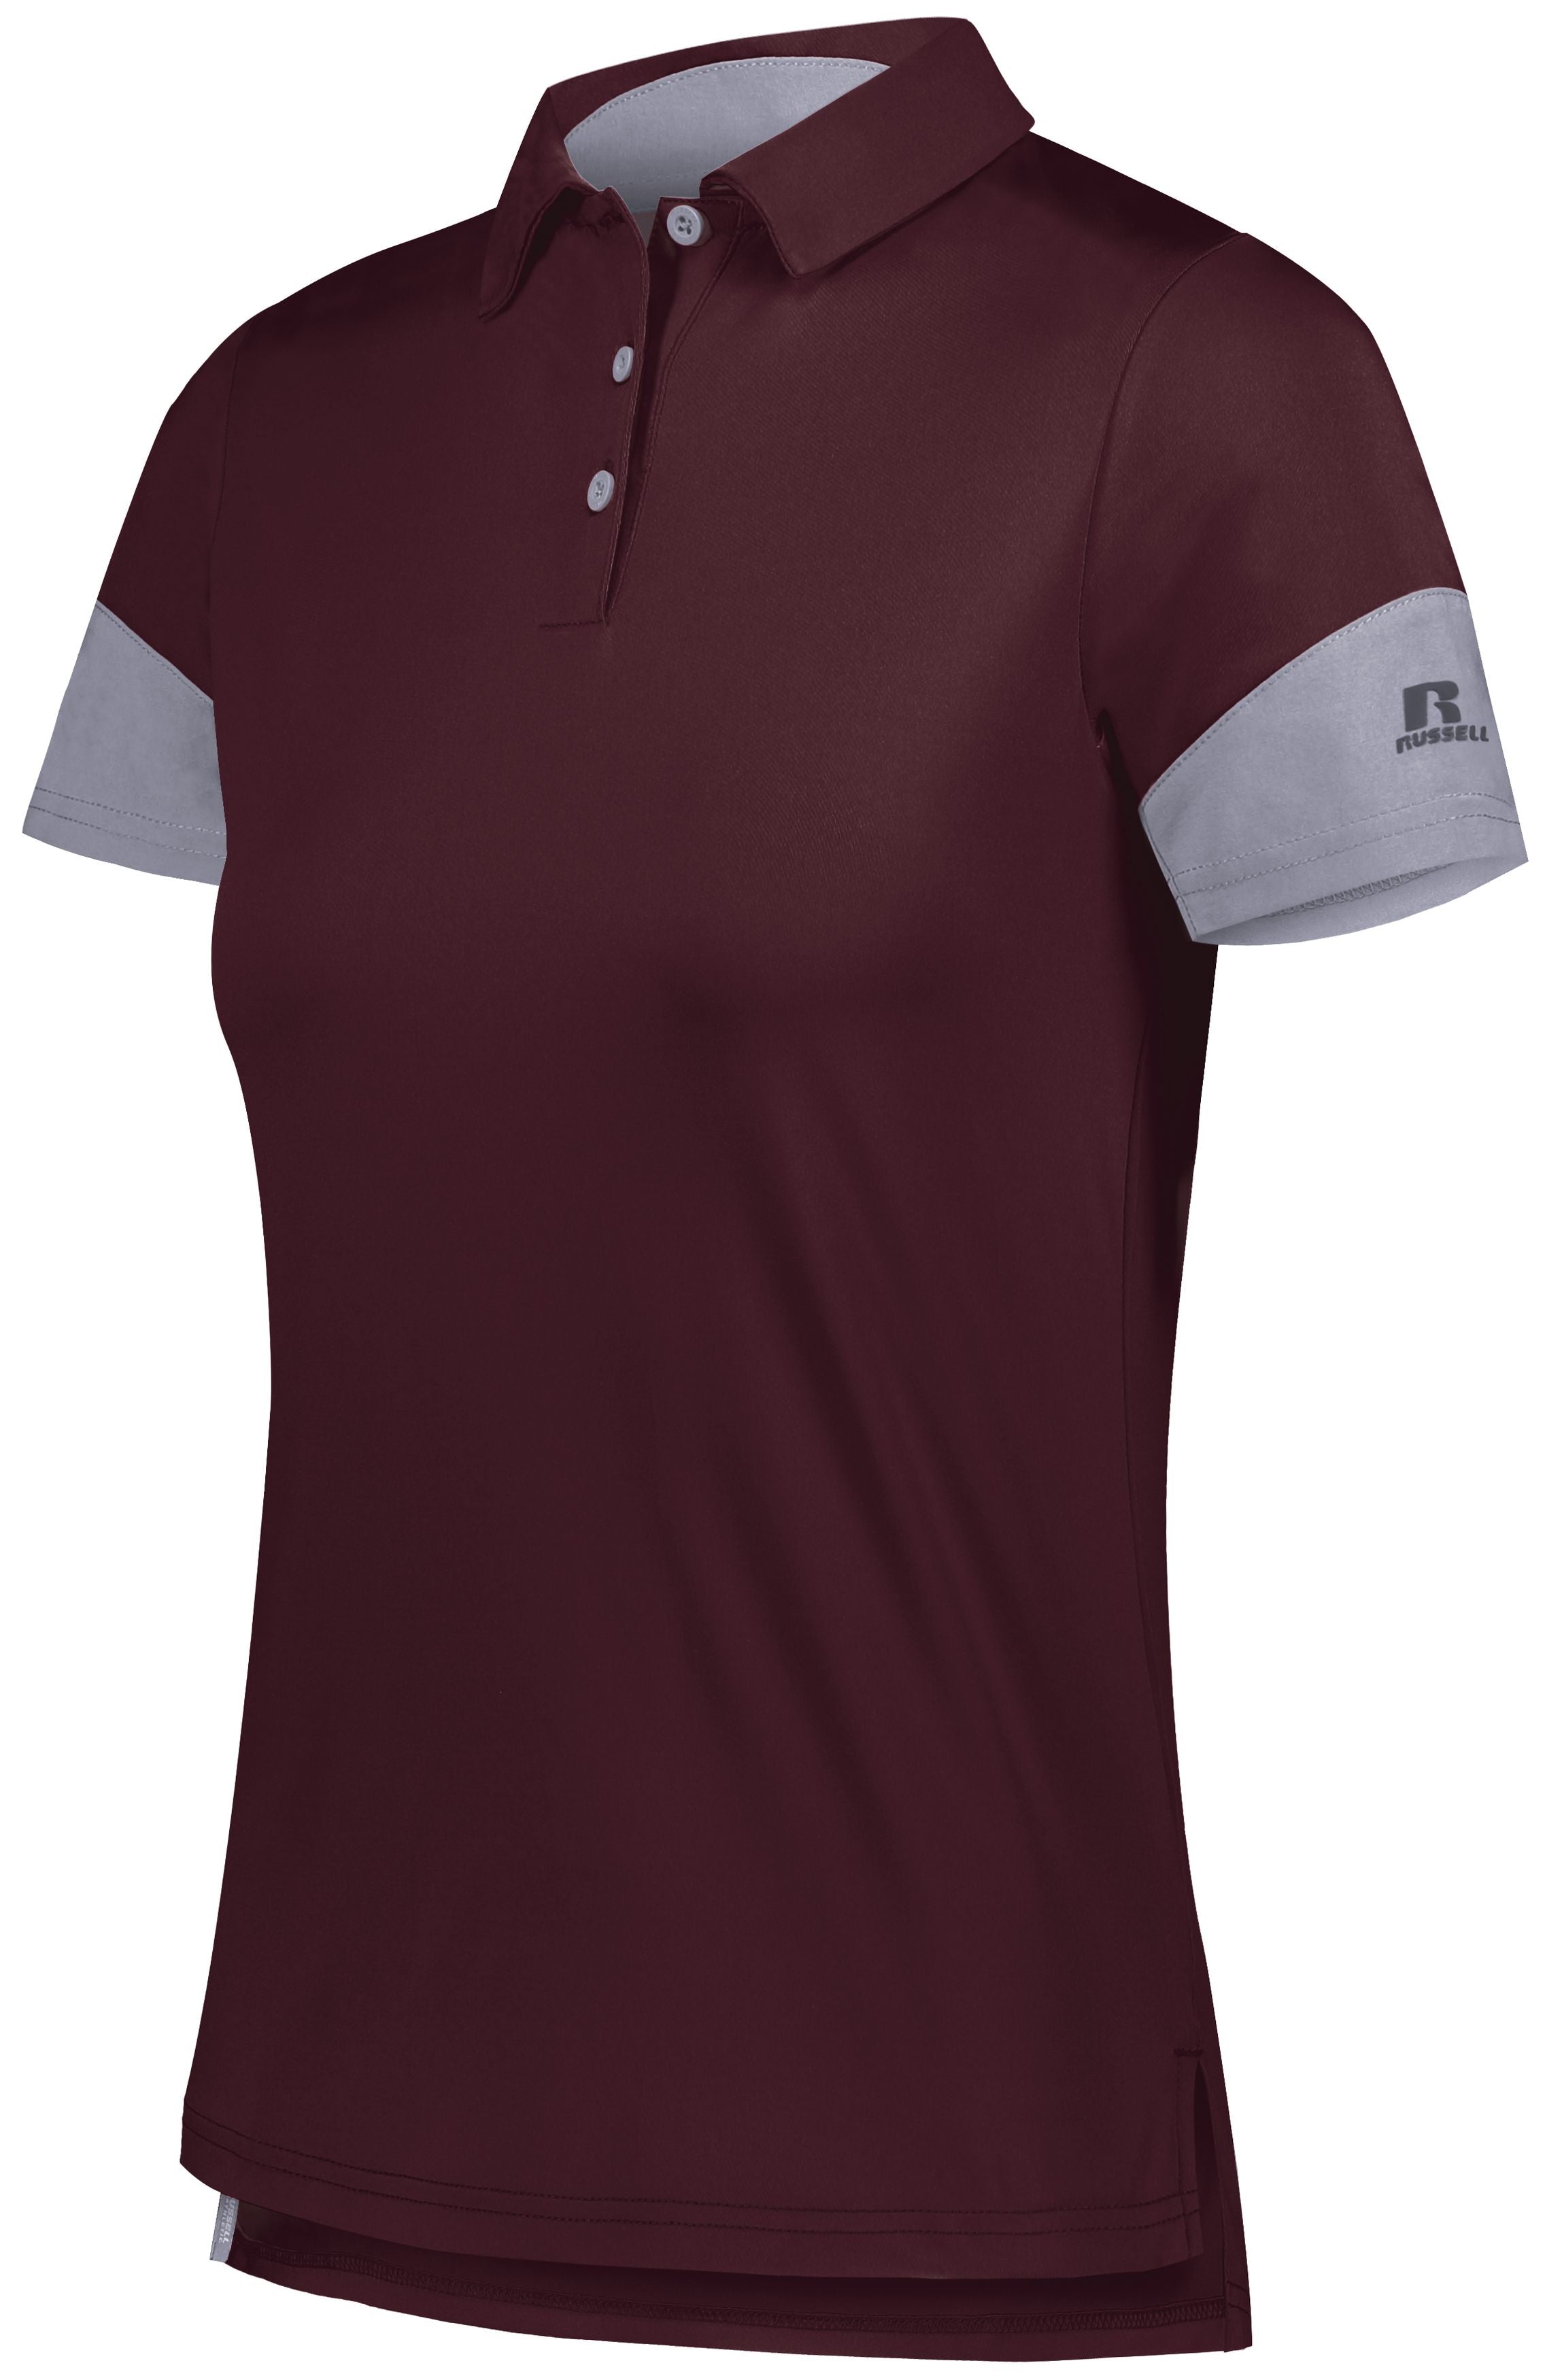 Russell Athletic Ladies Hybrid Polo in Maroon/Steel  -Part of the Ladies, Ladies-Polo, Polos, Russell-Athletic-Products, Shirts product lines at KanaleyCreations.com